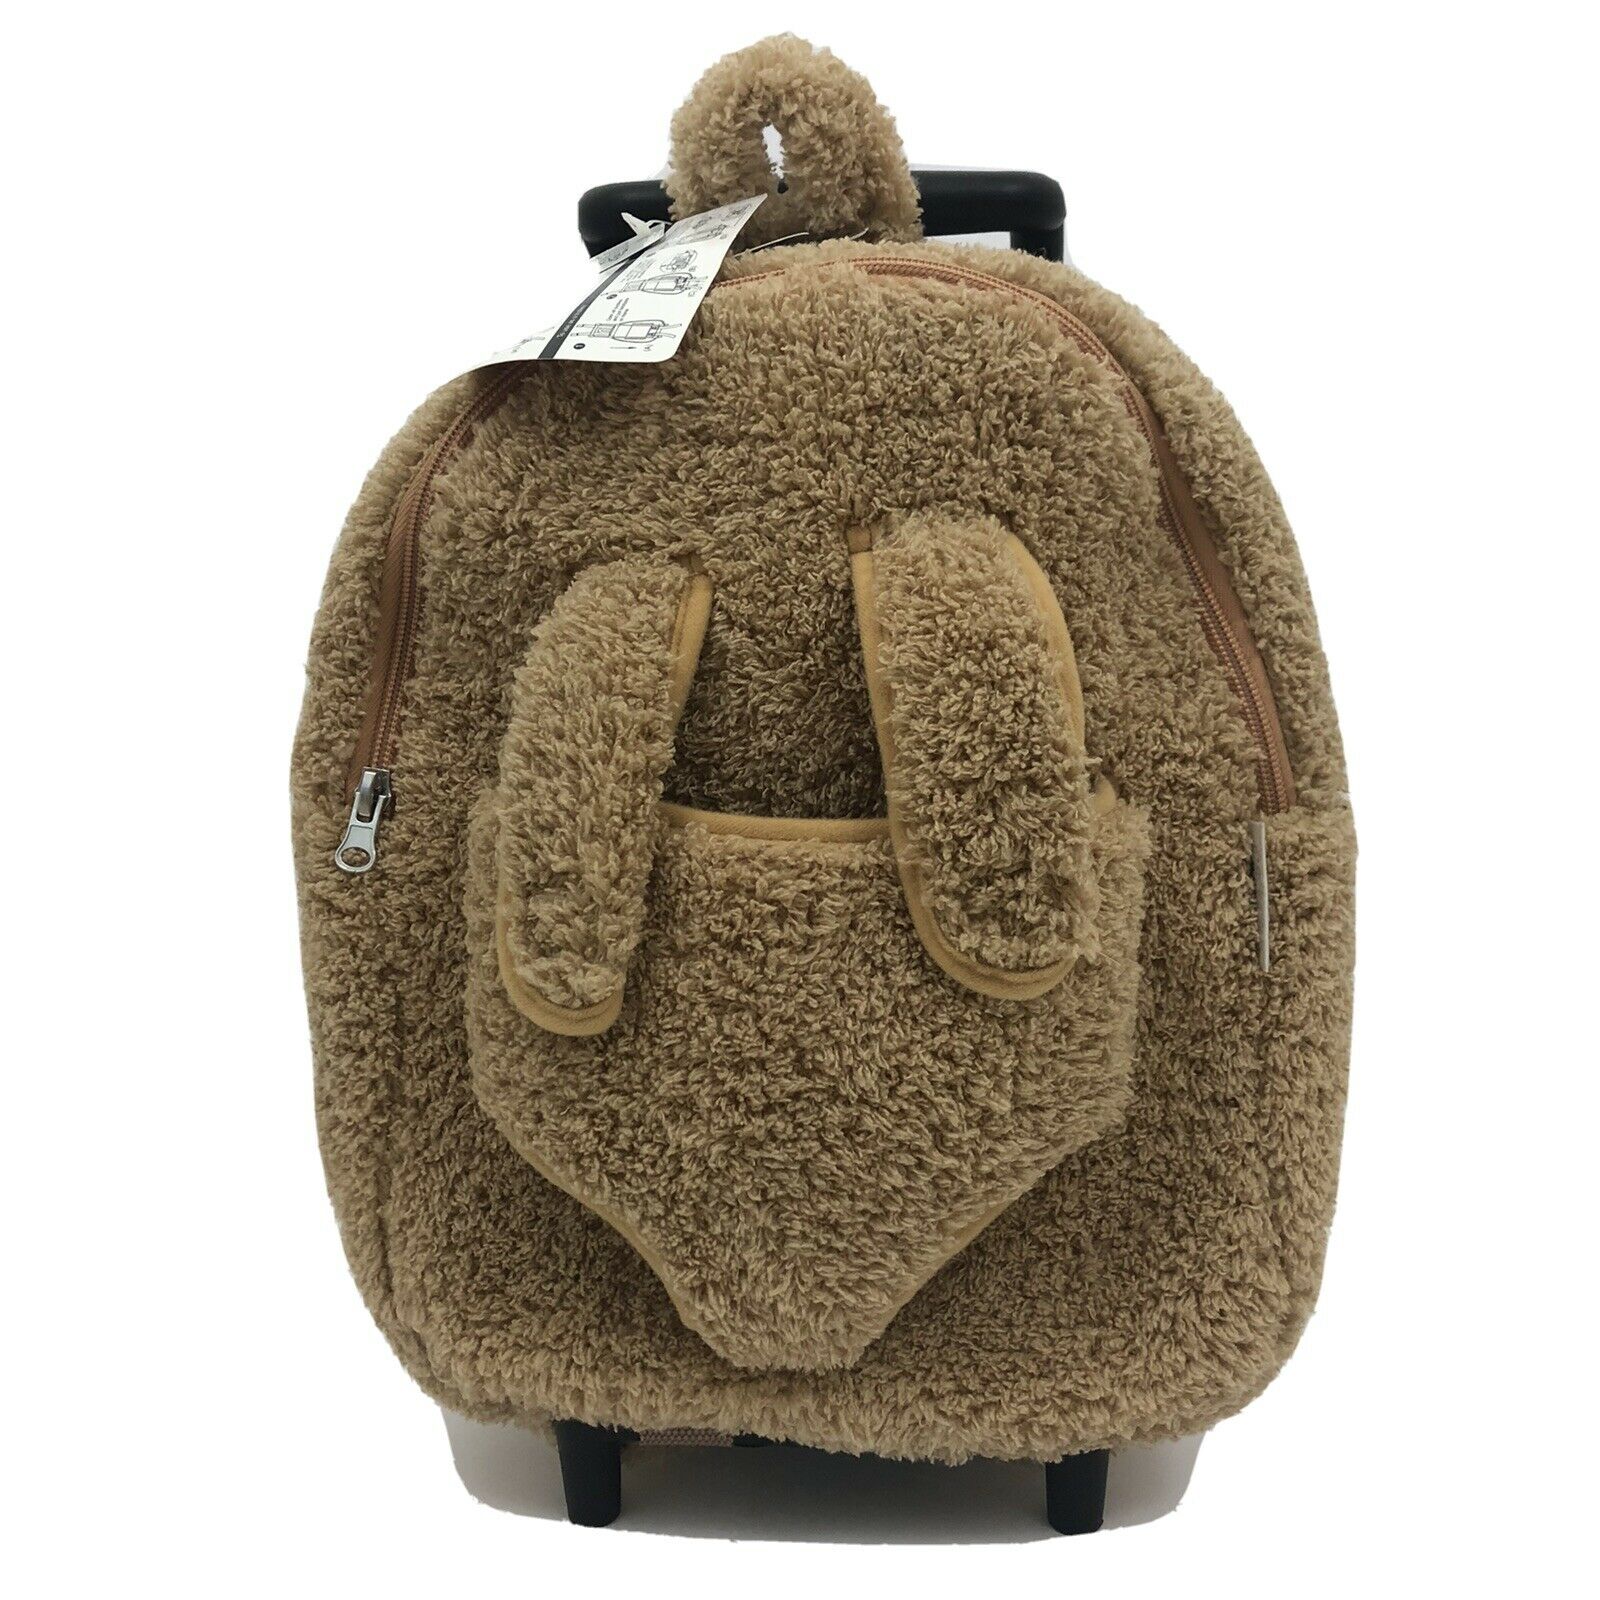 Popatu Kids Rolling Backpack Soft Fuzzy Brown 10" X 12" Stuffie Carrying Nwt